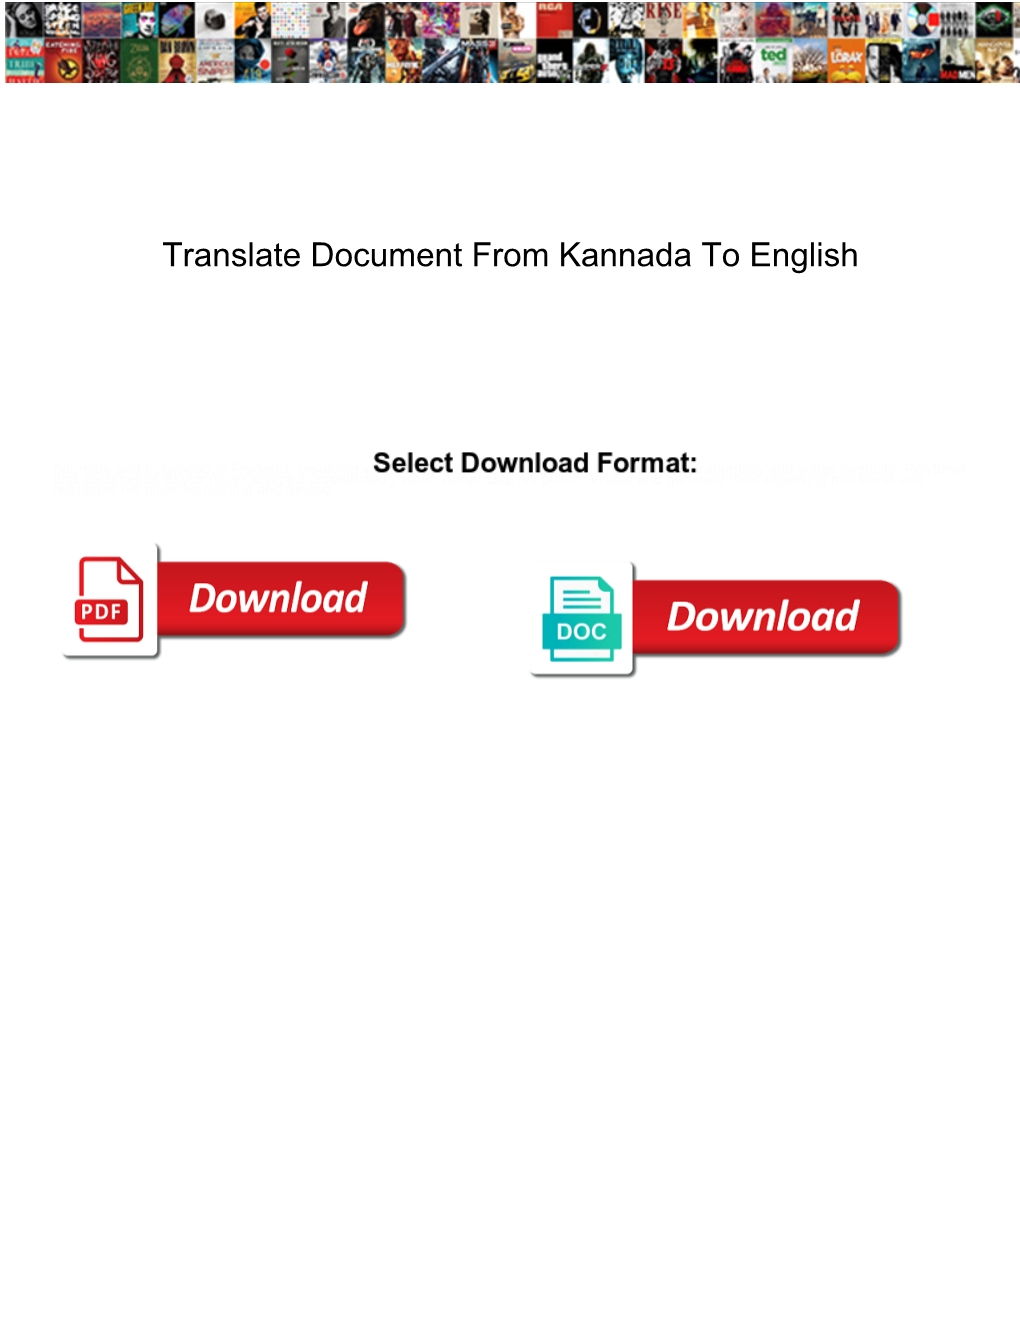 Translate Document from Kannada to English